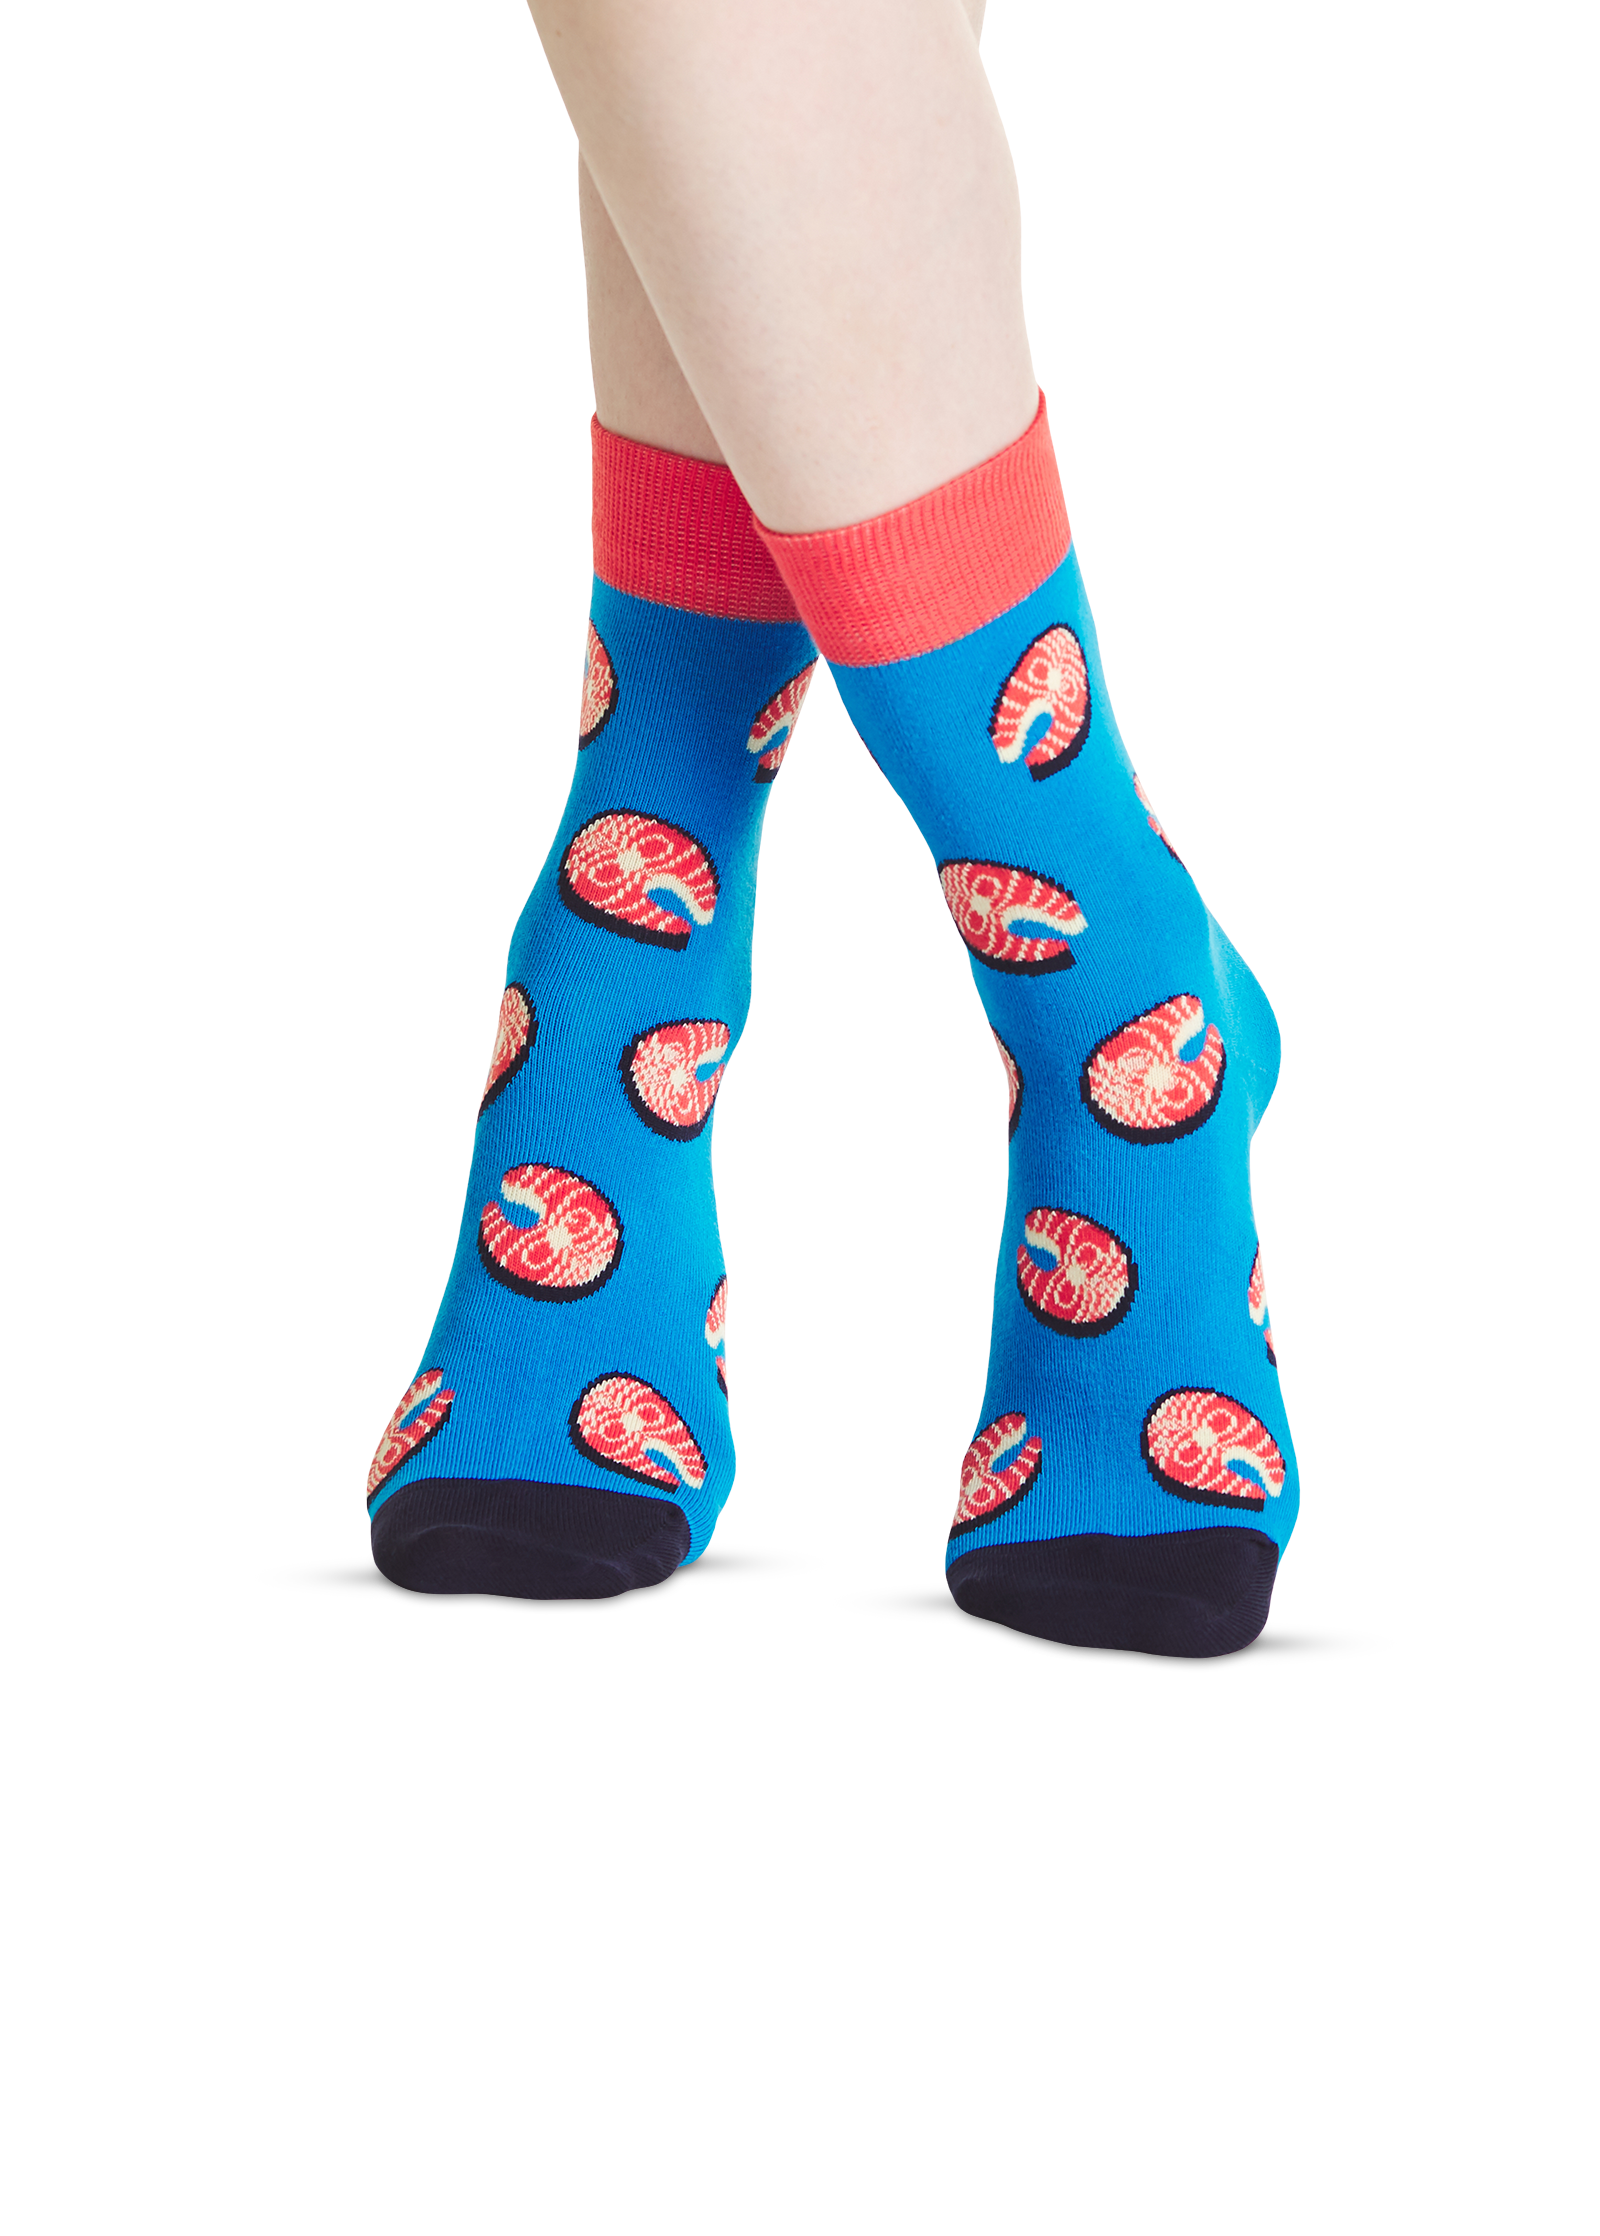 Salmon butterfly | Funny colored socks | Buy funny colored socks for ...